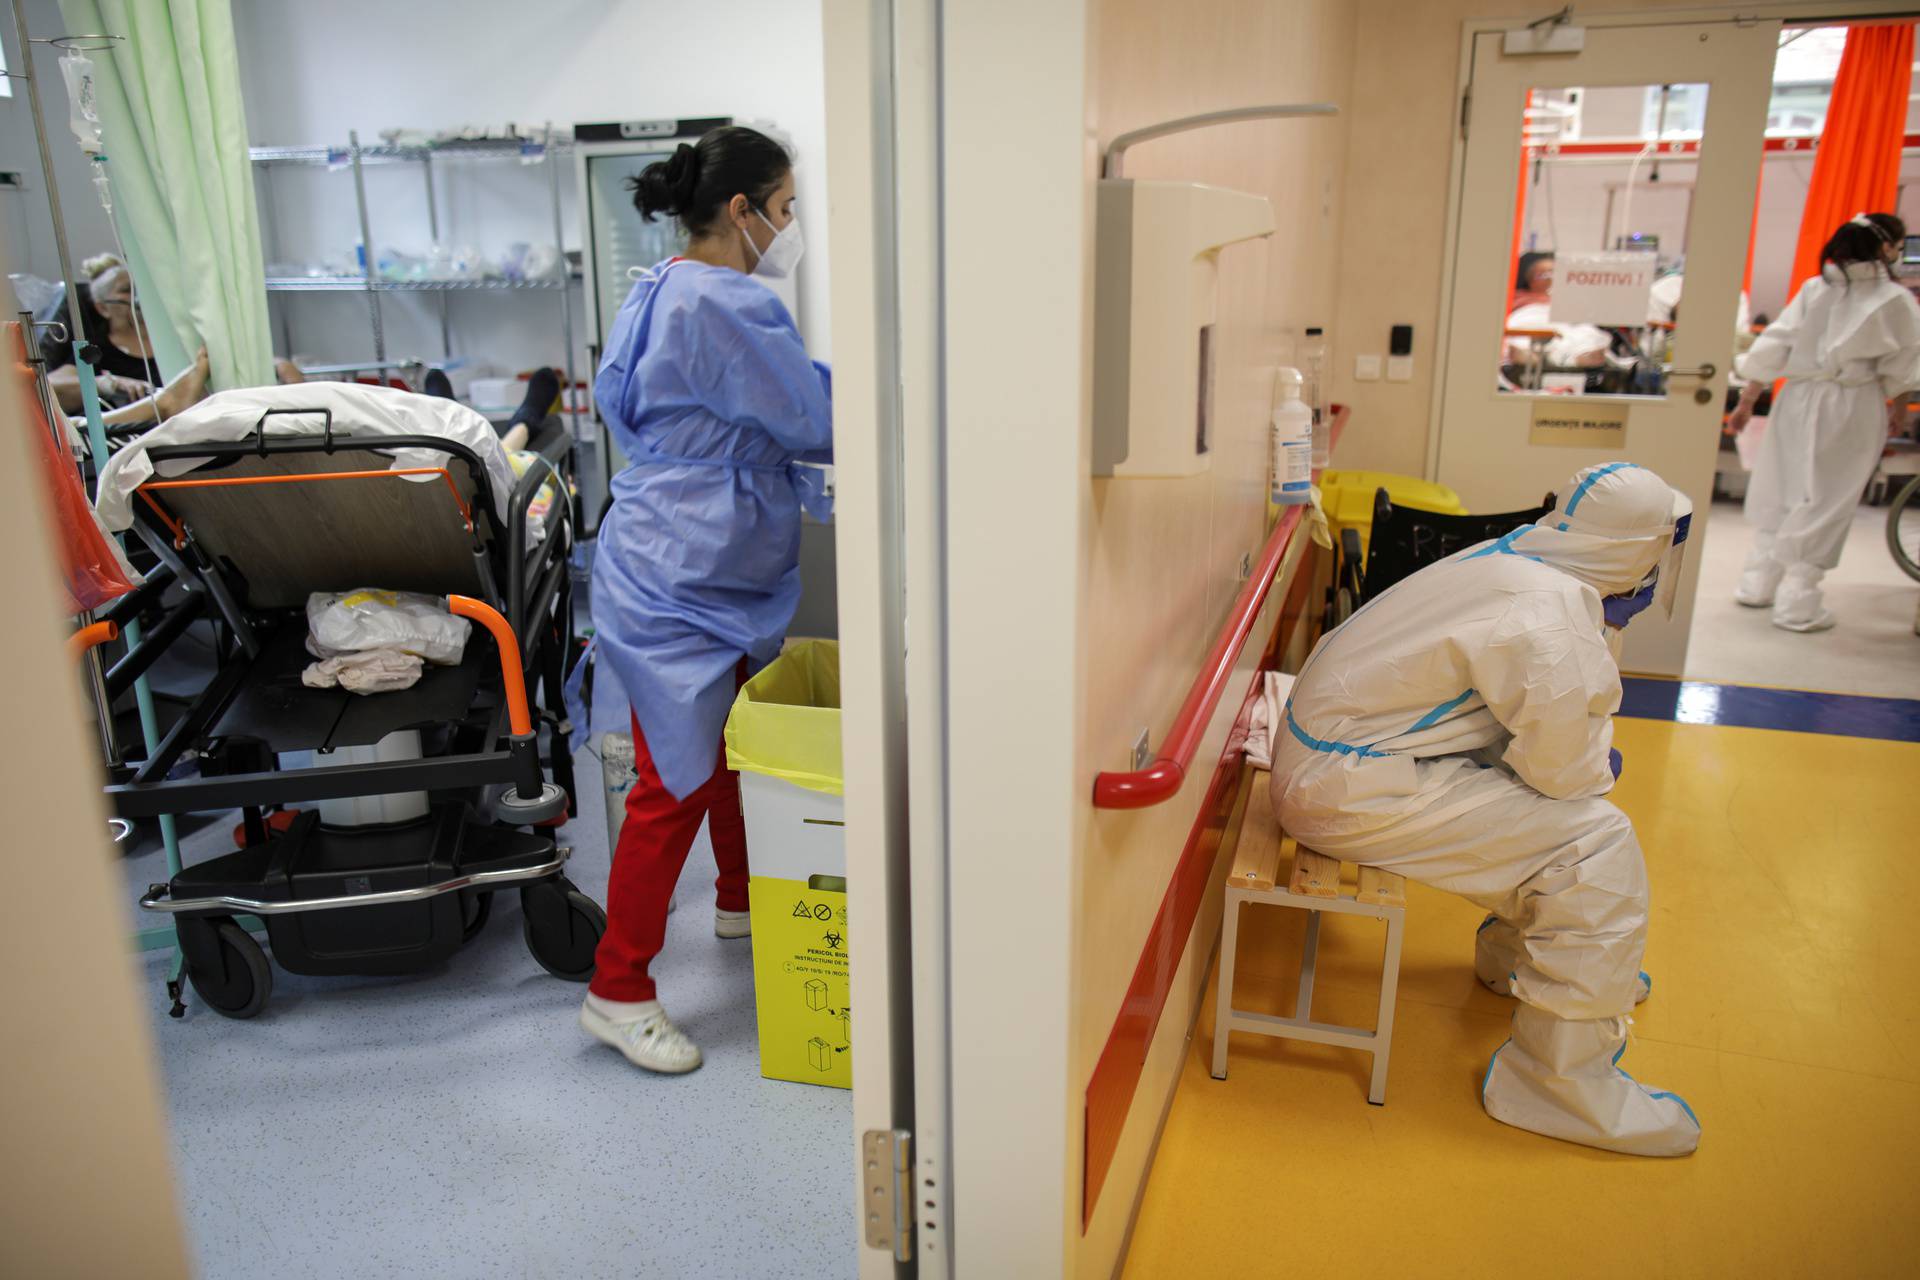 Medical professionals assist coronavirus disease (COVID-19) patients in the overcrowded intensive care unit